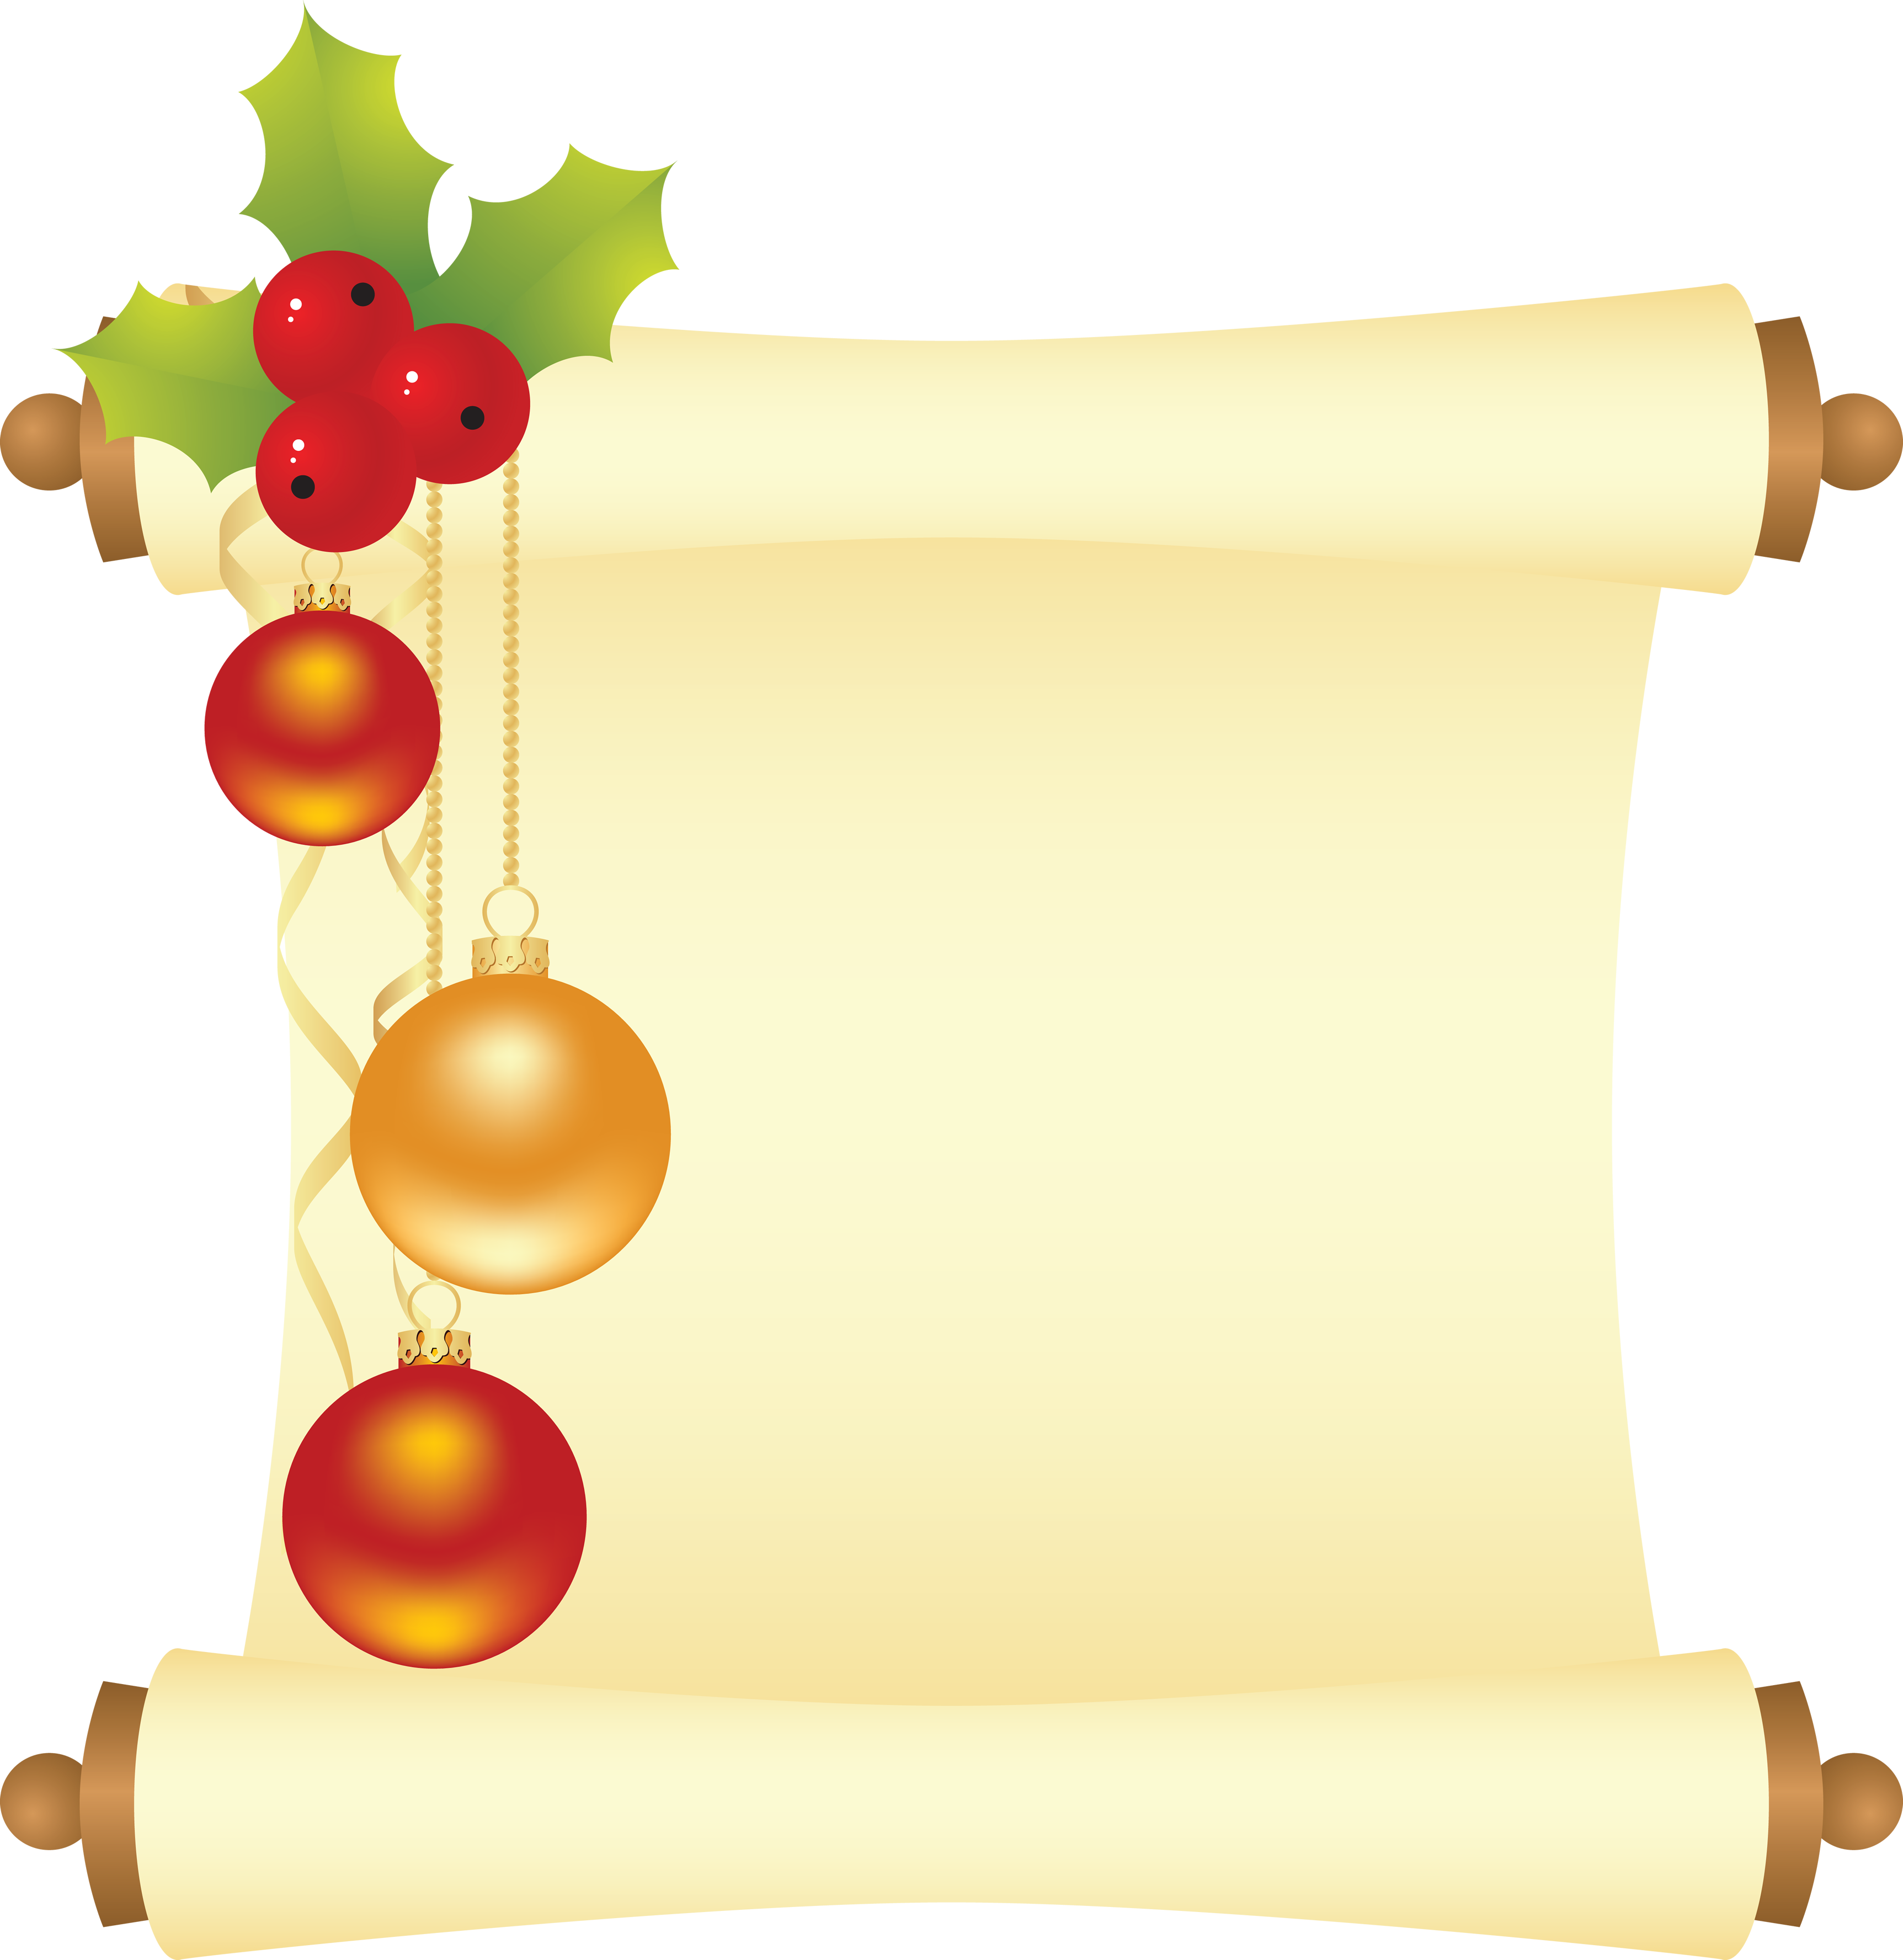 Free cliparts download clip. Scroll clipart christmas